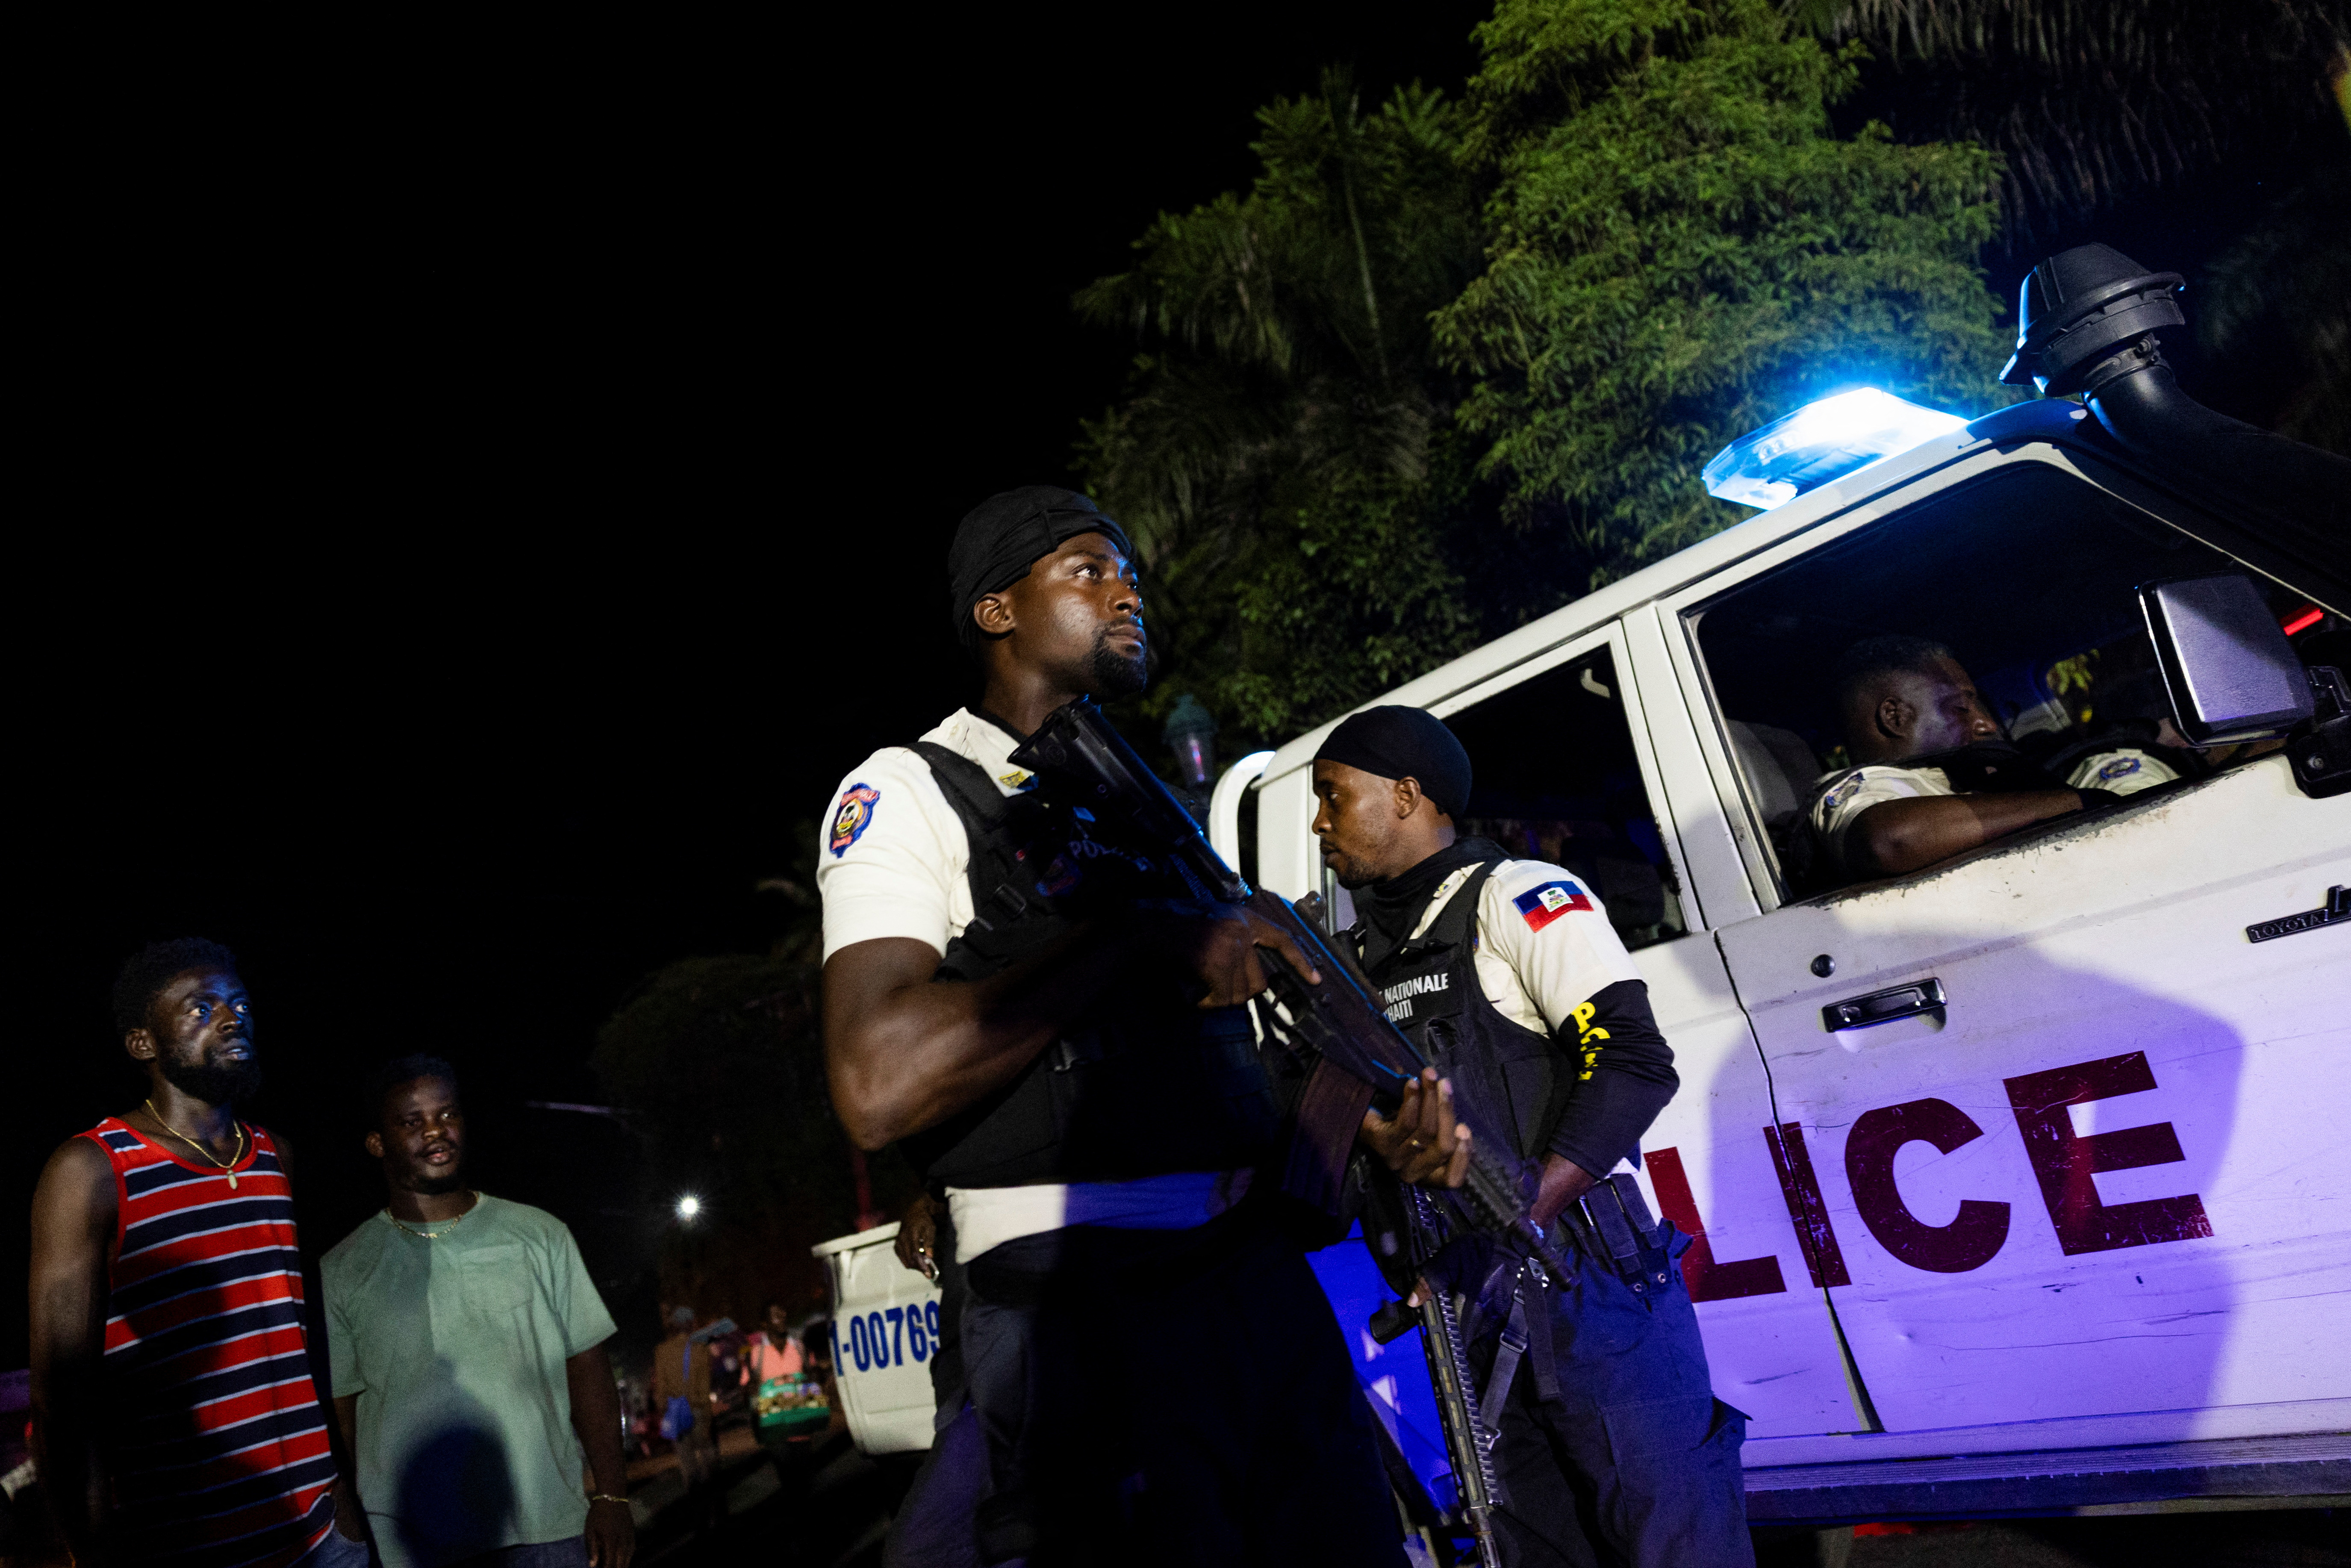 Kenyan police arrive as part of a peacekeeping mission in Haiti